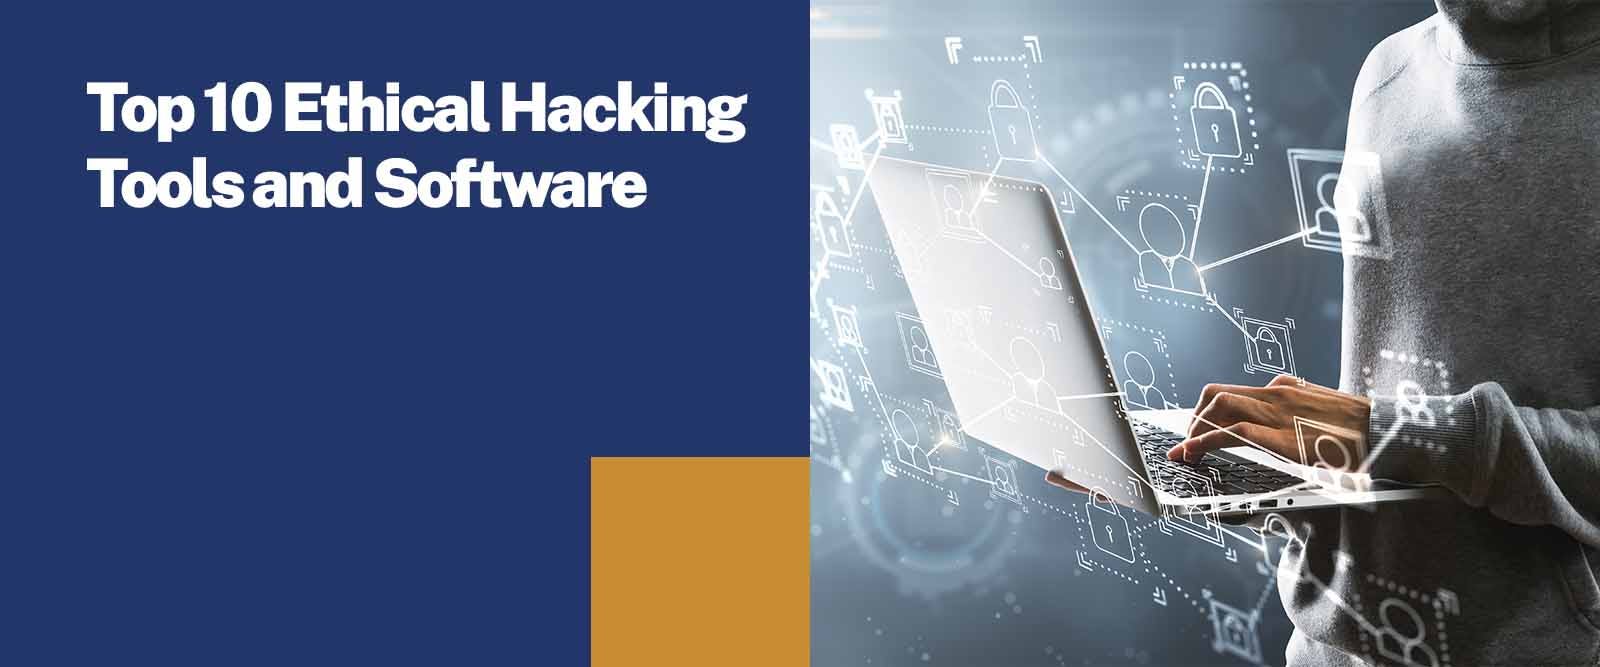 Top 10 Ethical Hacking Tools and Software